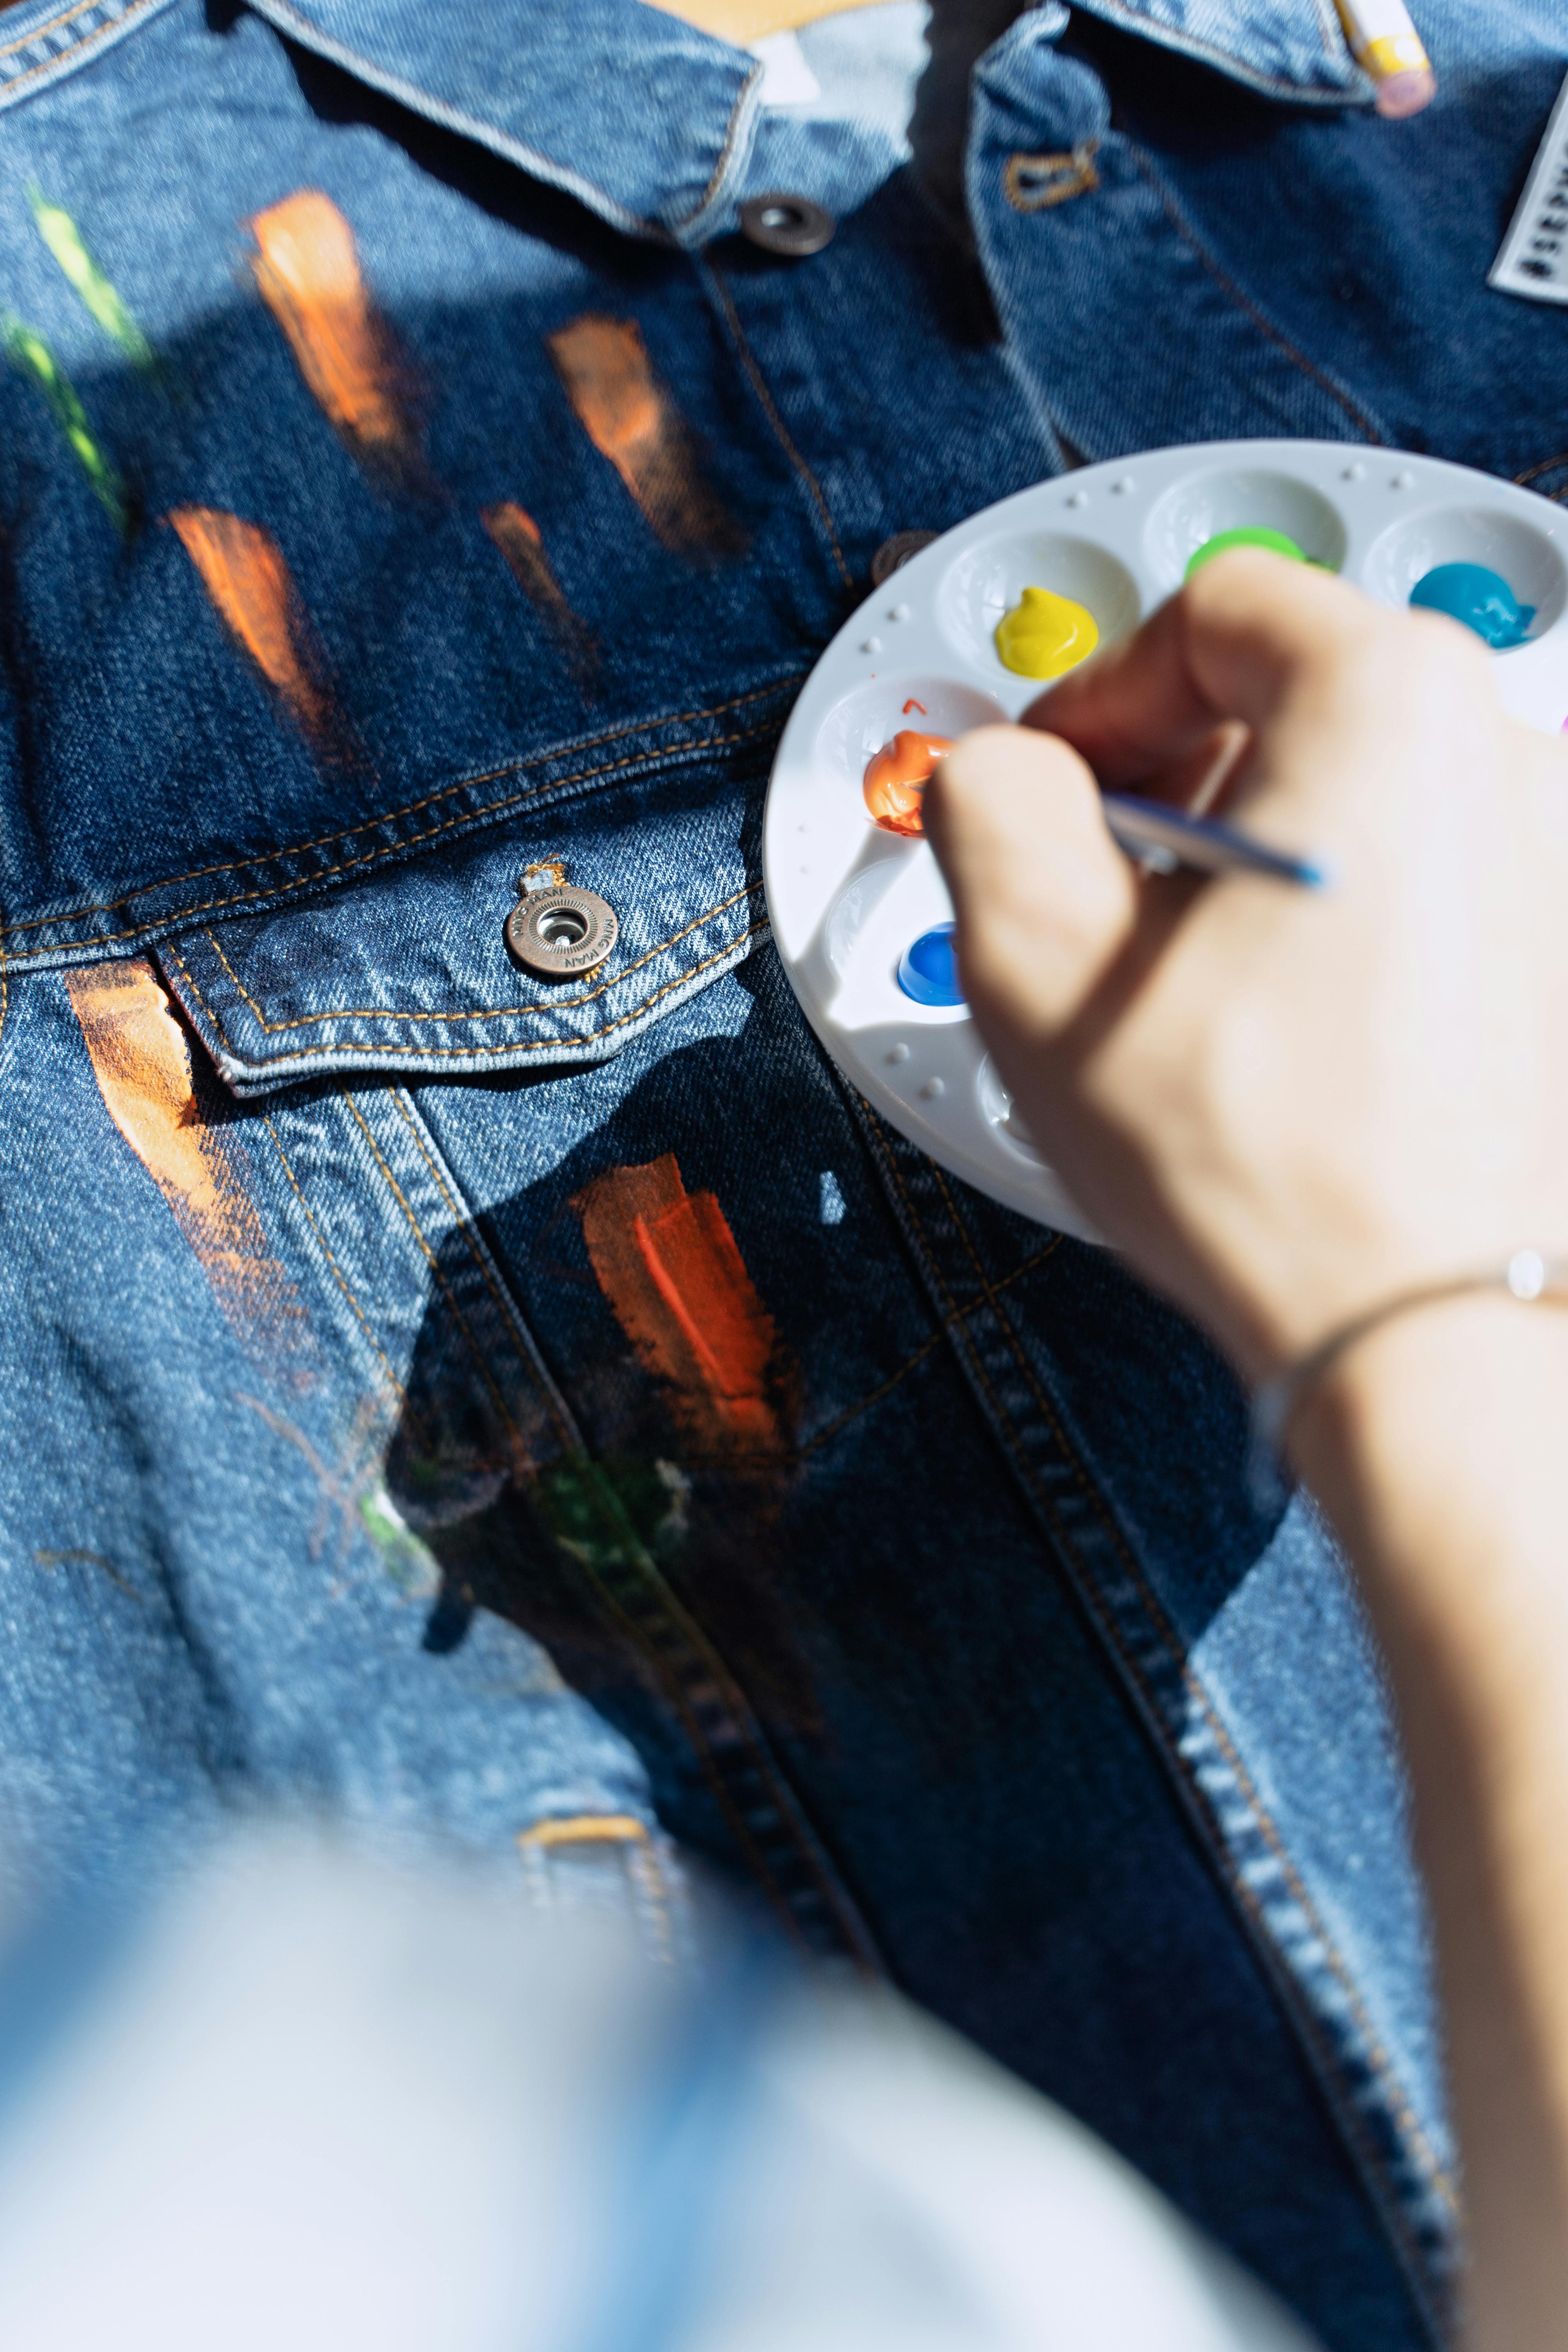 Buy Painted Jeans Birdy Painting Painted Denim Online in India - Etsy